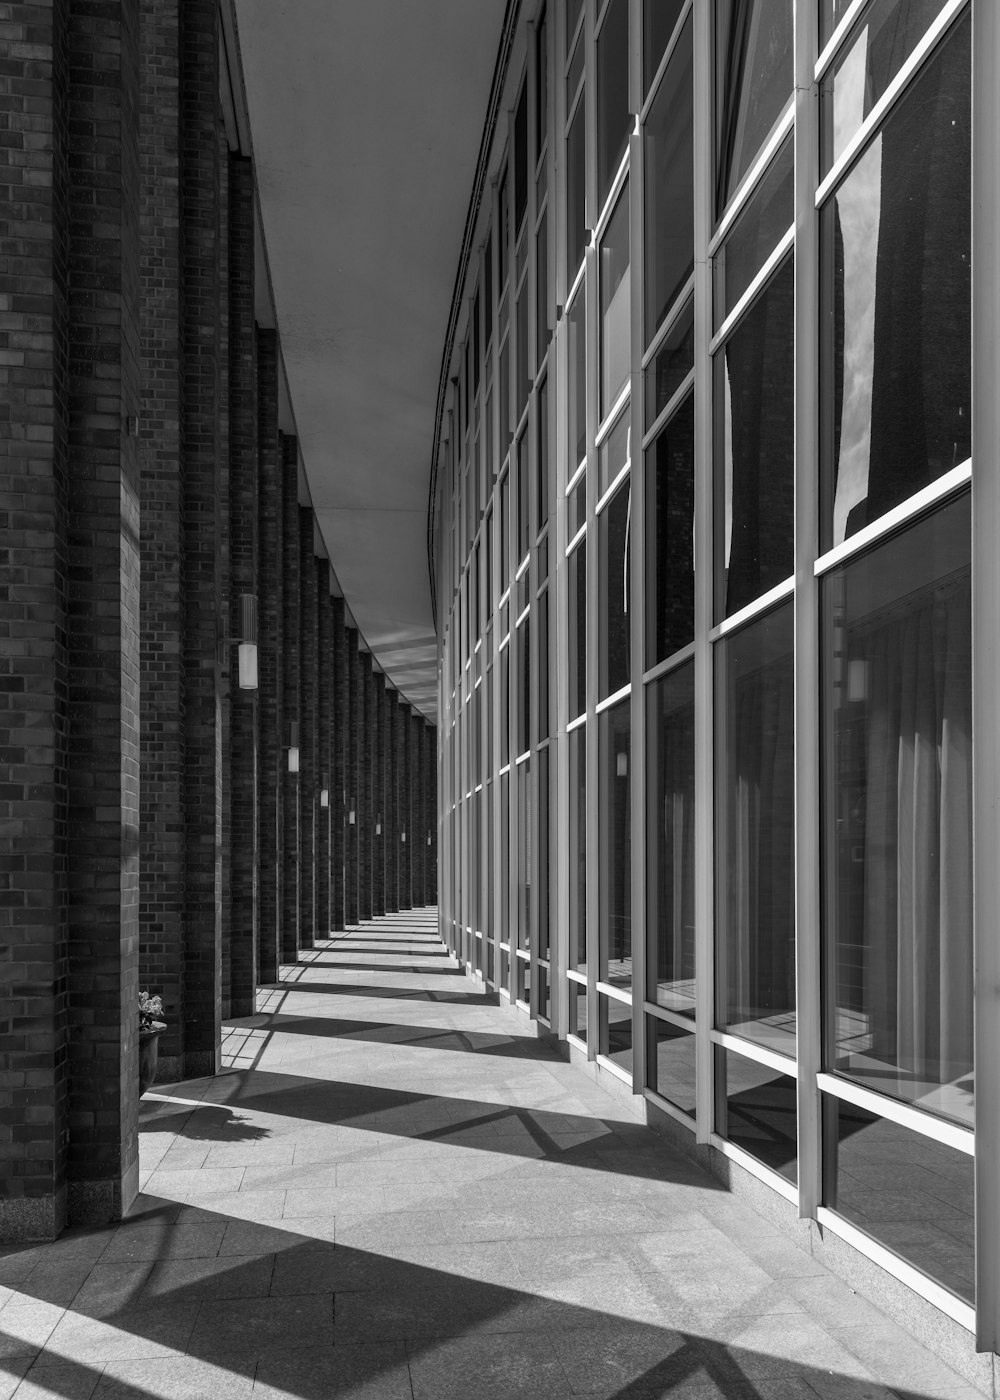 a black and white photo of a row of windows